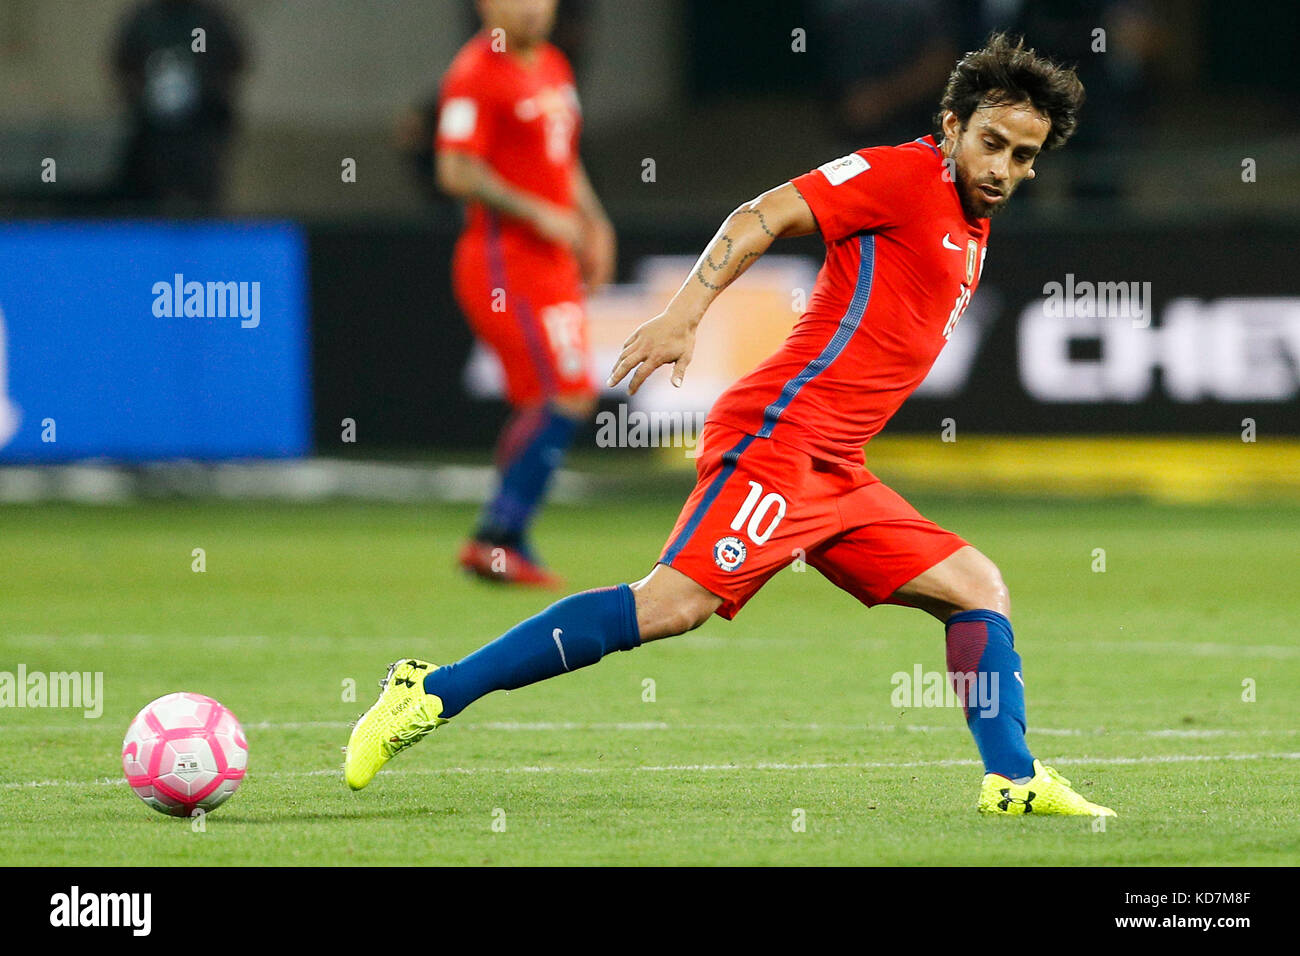 Sao Paulo, Brazil. 10th Oct, 2017. Jorge Valdivia of Chile during a match between Brazil and Chile valid for the last round of the World Cup Qualifiers Russia 2018, held at Allianz Parque in the neighborhood of Barra Funda, west of the capital. Credit: Foto Arena LTDA/Alamy Live News Stock Photo